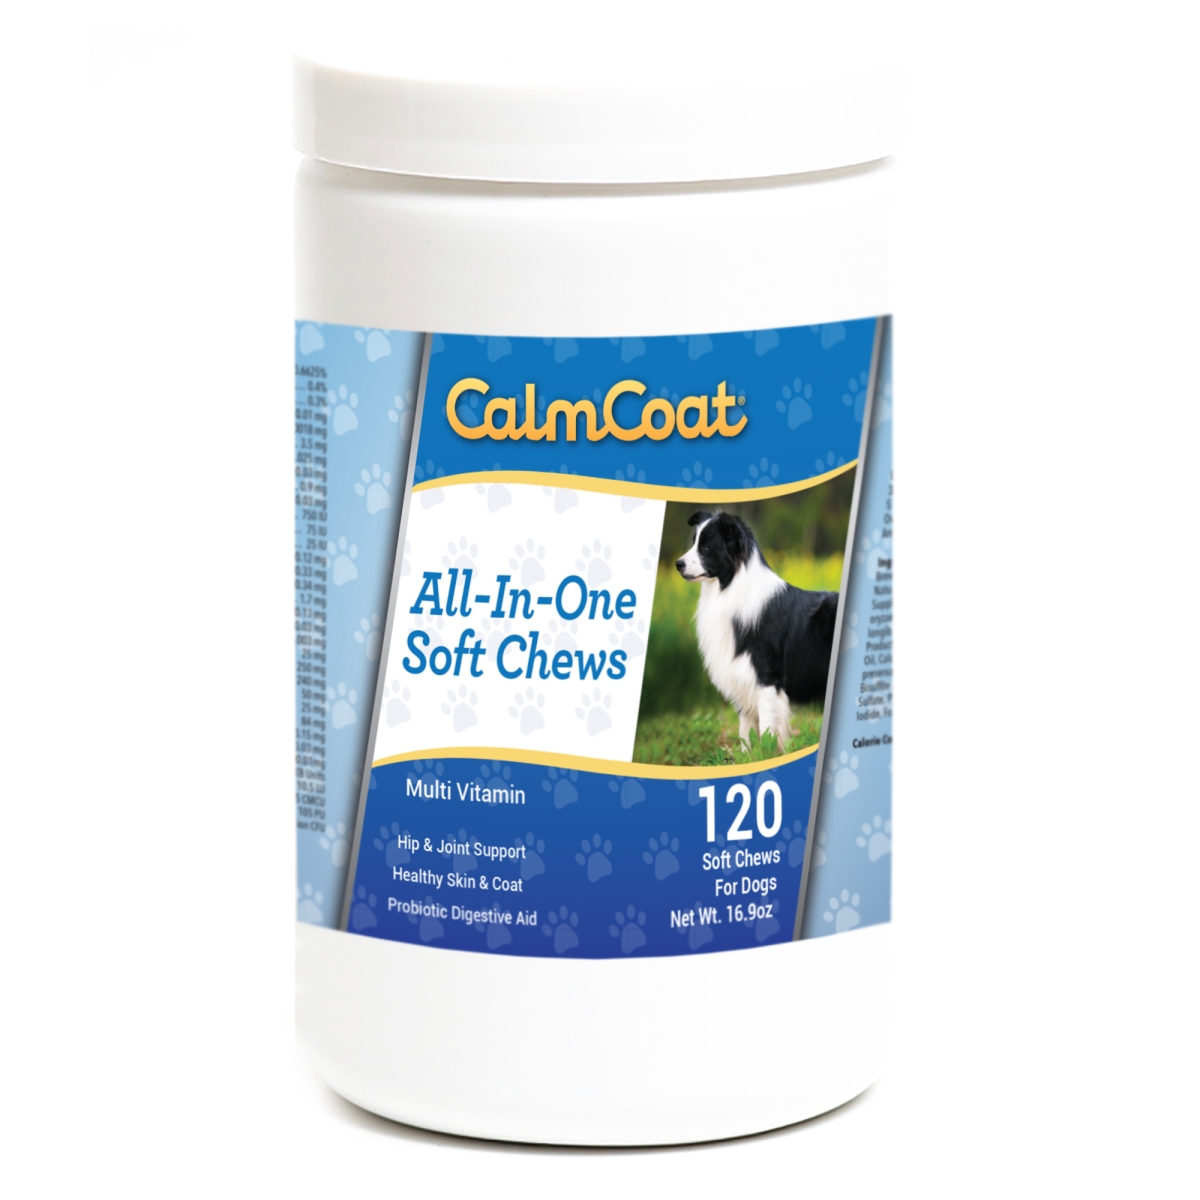 Picture of Calm Coat 192959811391 Complete Multivitamin All-In-One Soft Chews - 120 Count